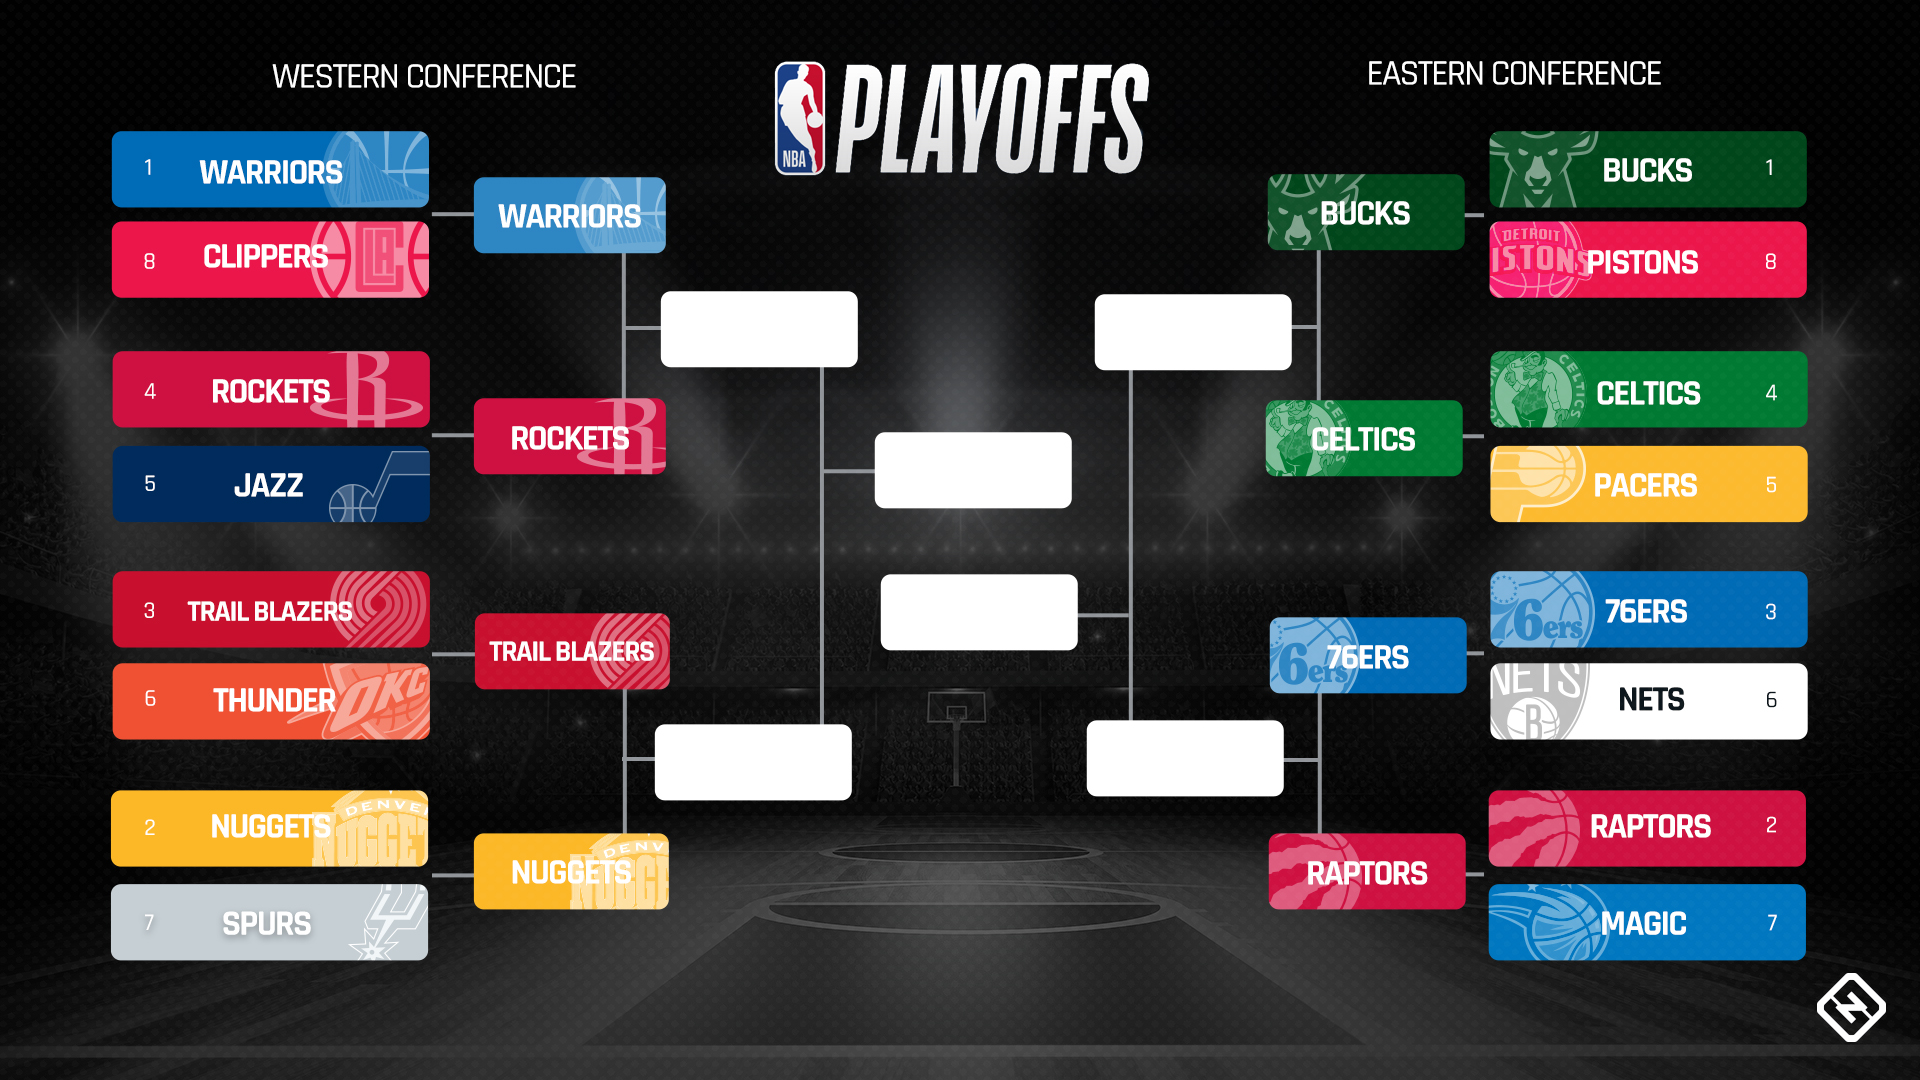 NBA playoffs today 2019: Live scores, TV schedule, updates from